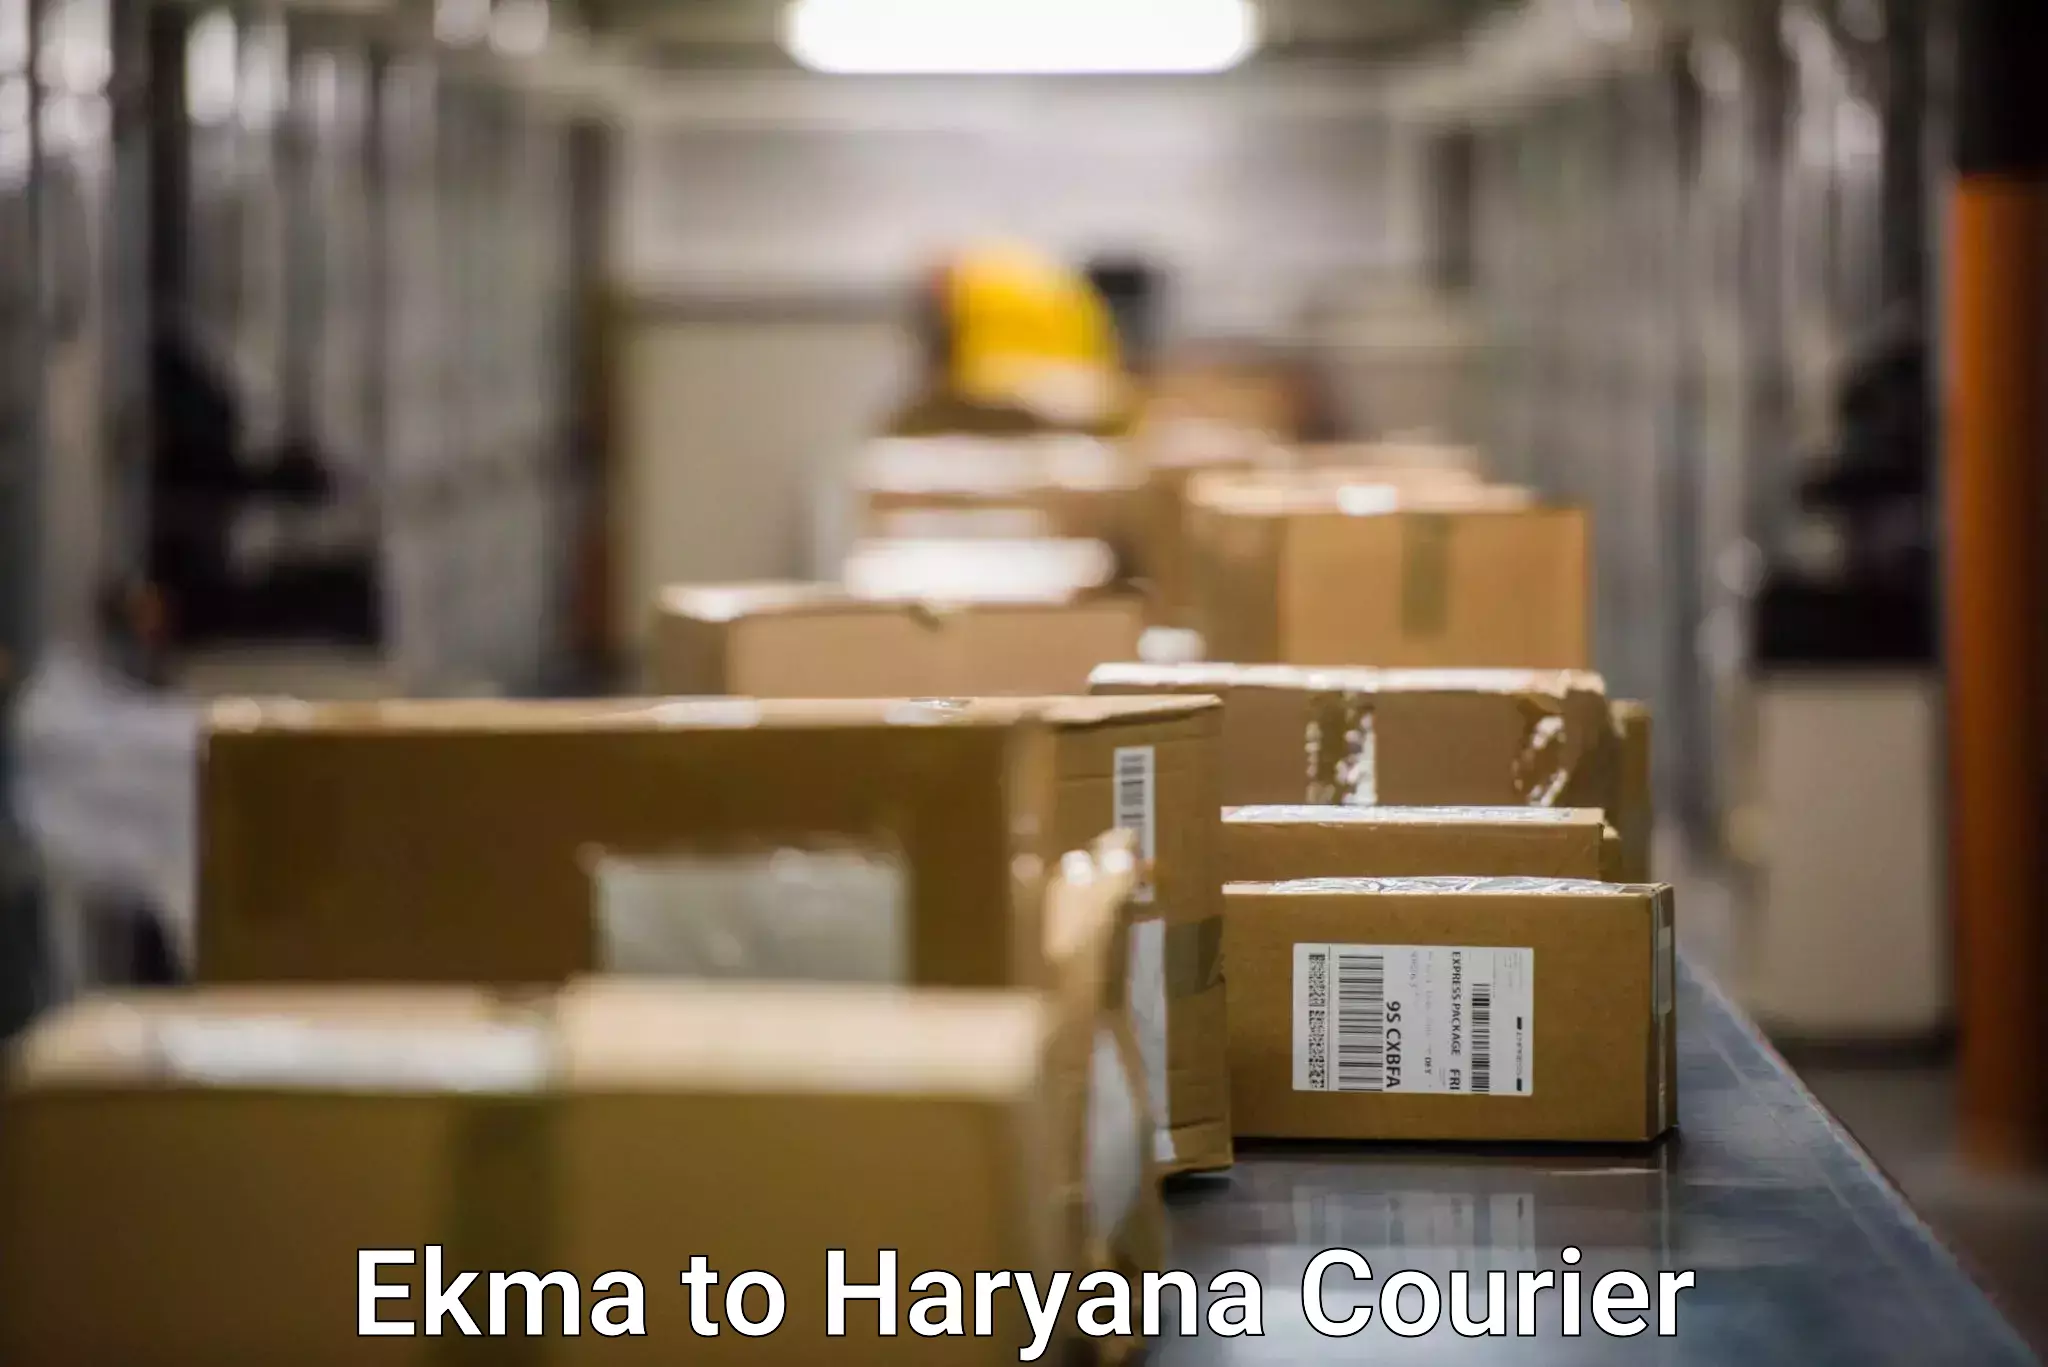 Parcel handling and care Ekma to Haryana